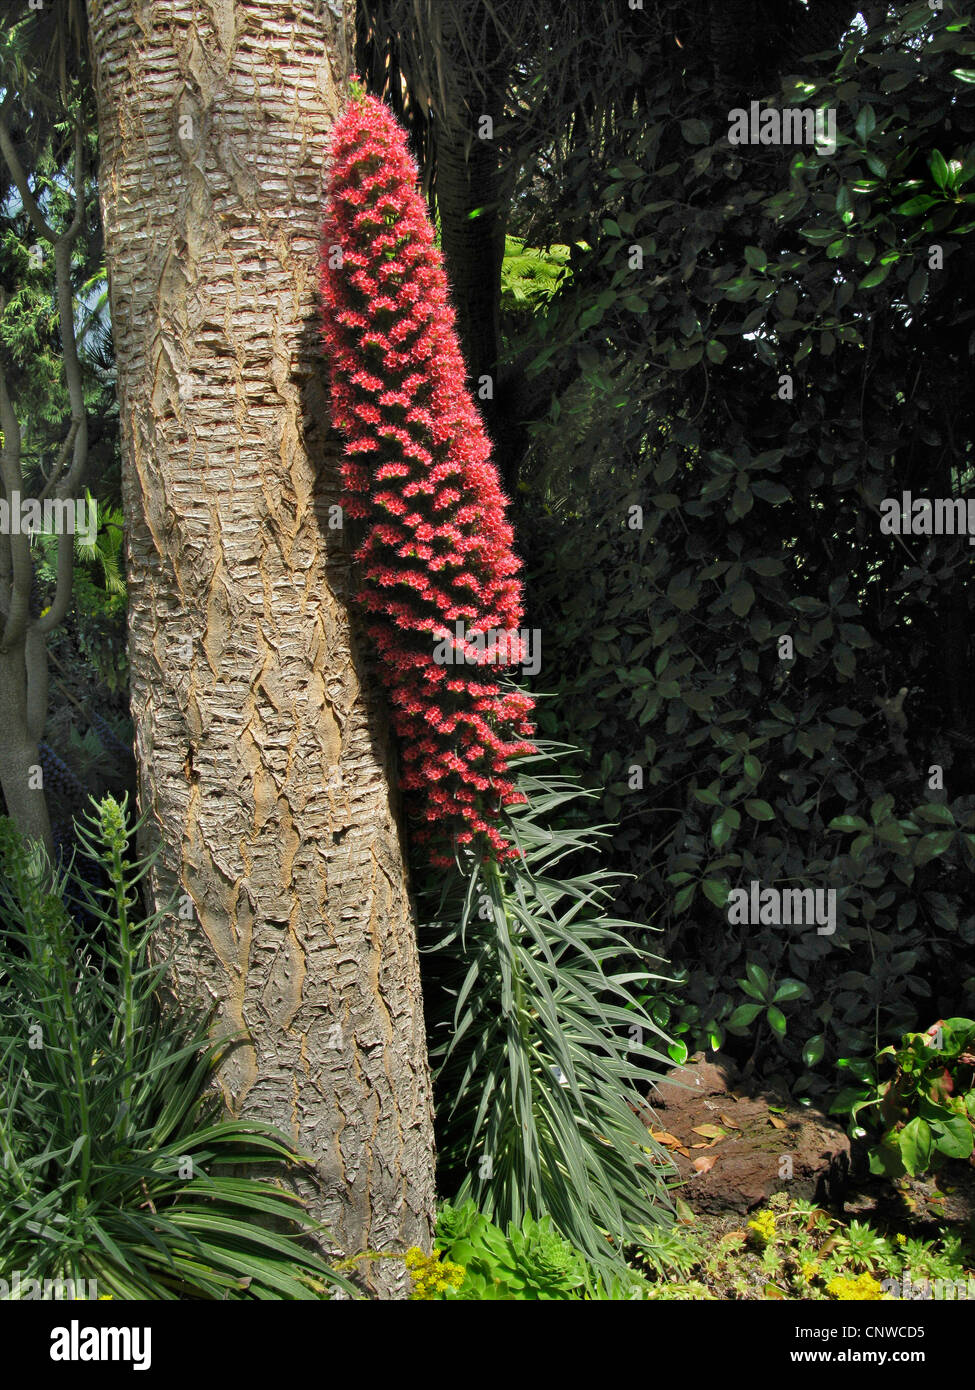 tower of jewels (Echium wildpretii), symbolic flower of Teide mountain on Tenerife, leaning at the trunk of a dragon tree Stock Photo